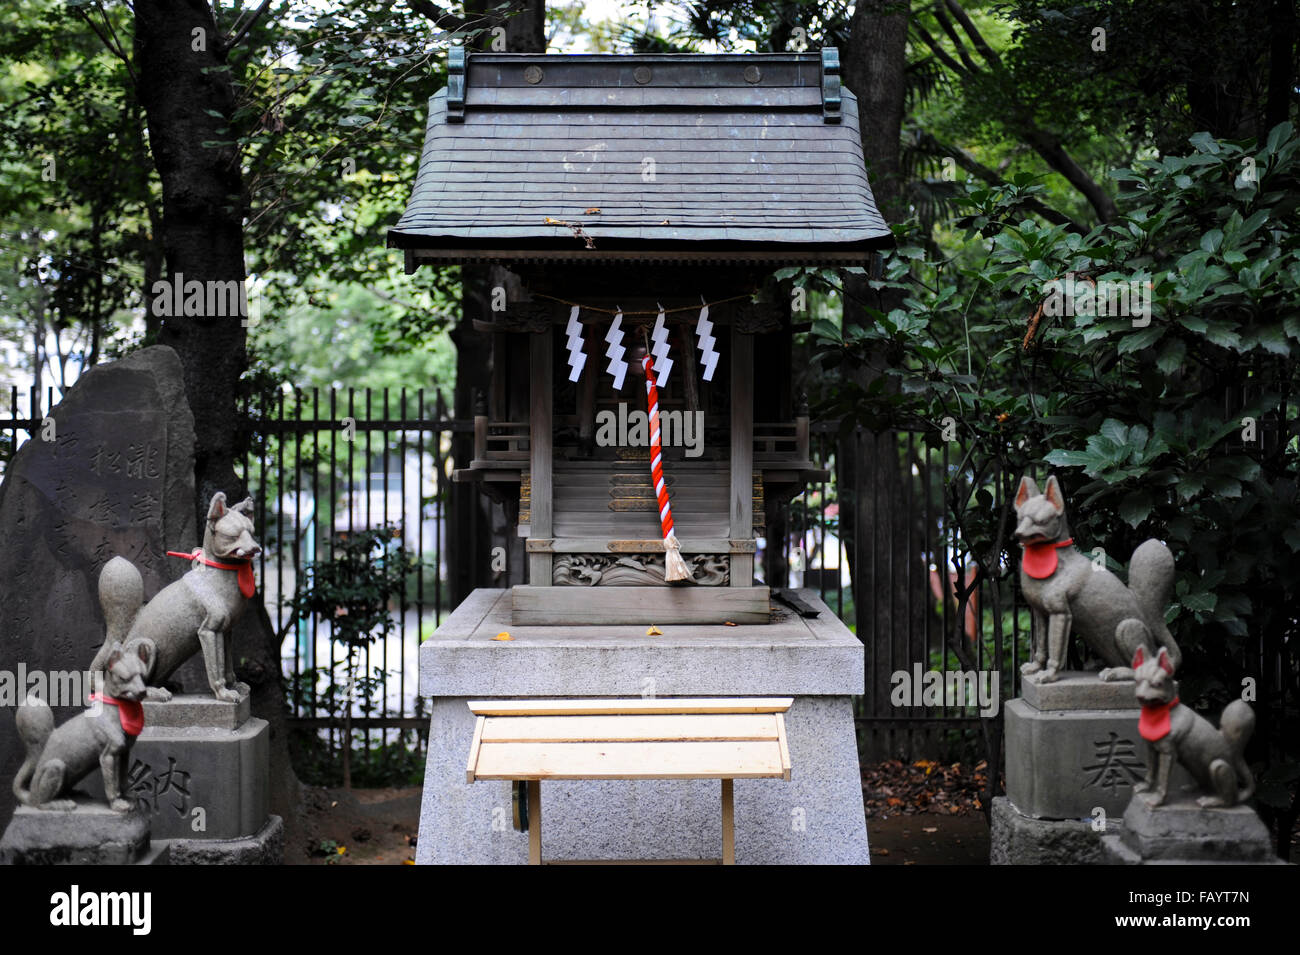 A Buddhist temple in the Todoroki Valley, Tokyo Stock Photo